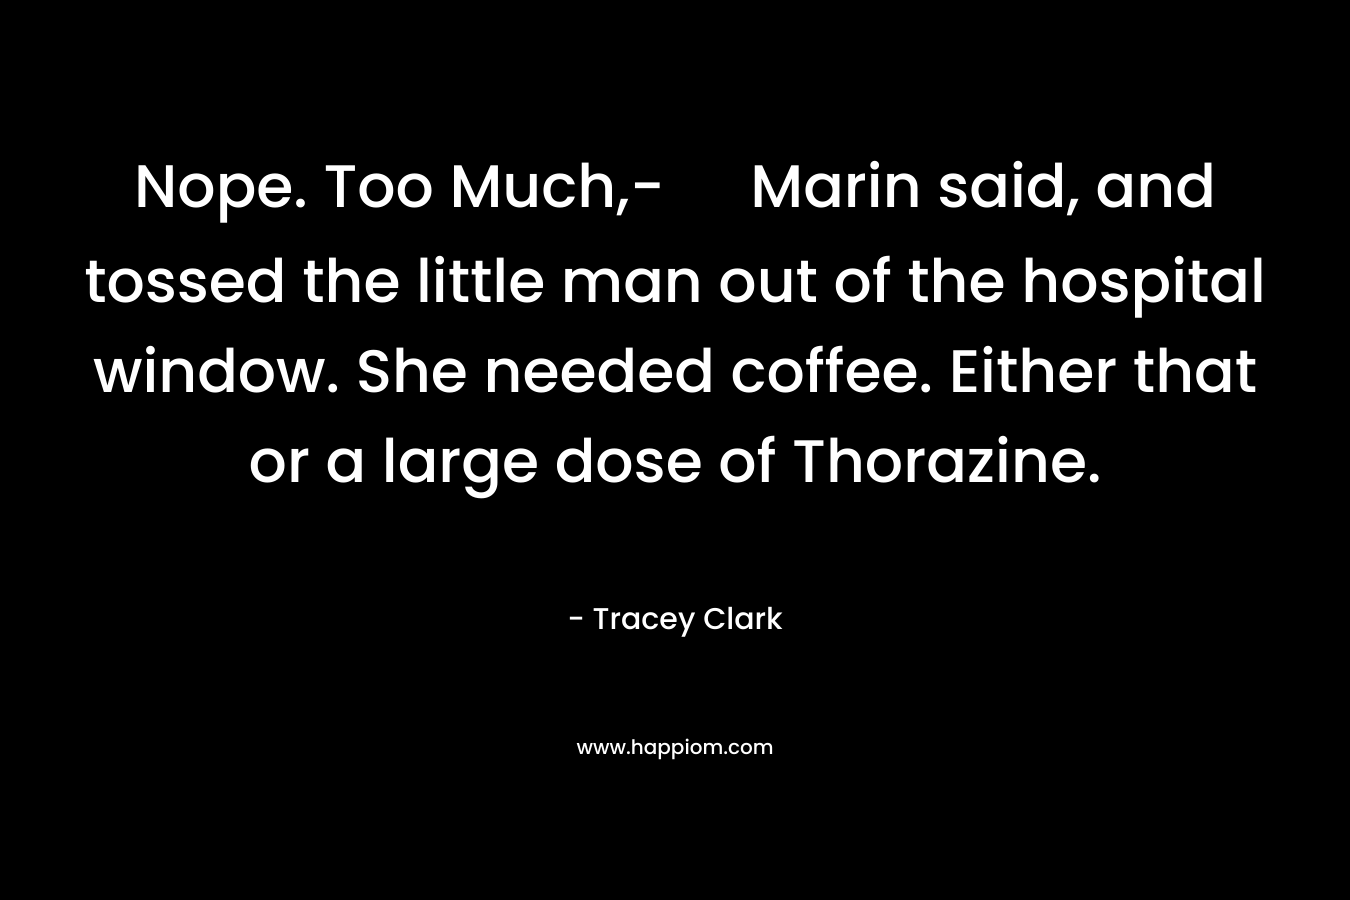 Nope. Too Much,- Marin said, and tossed the little man out of the hospital window. She needed coffee. Either that or a large dose of Thorazine. – Tracey Clark